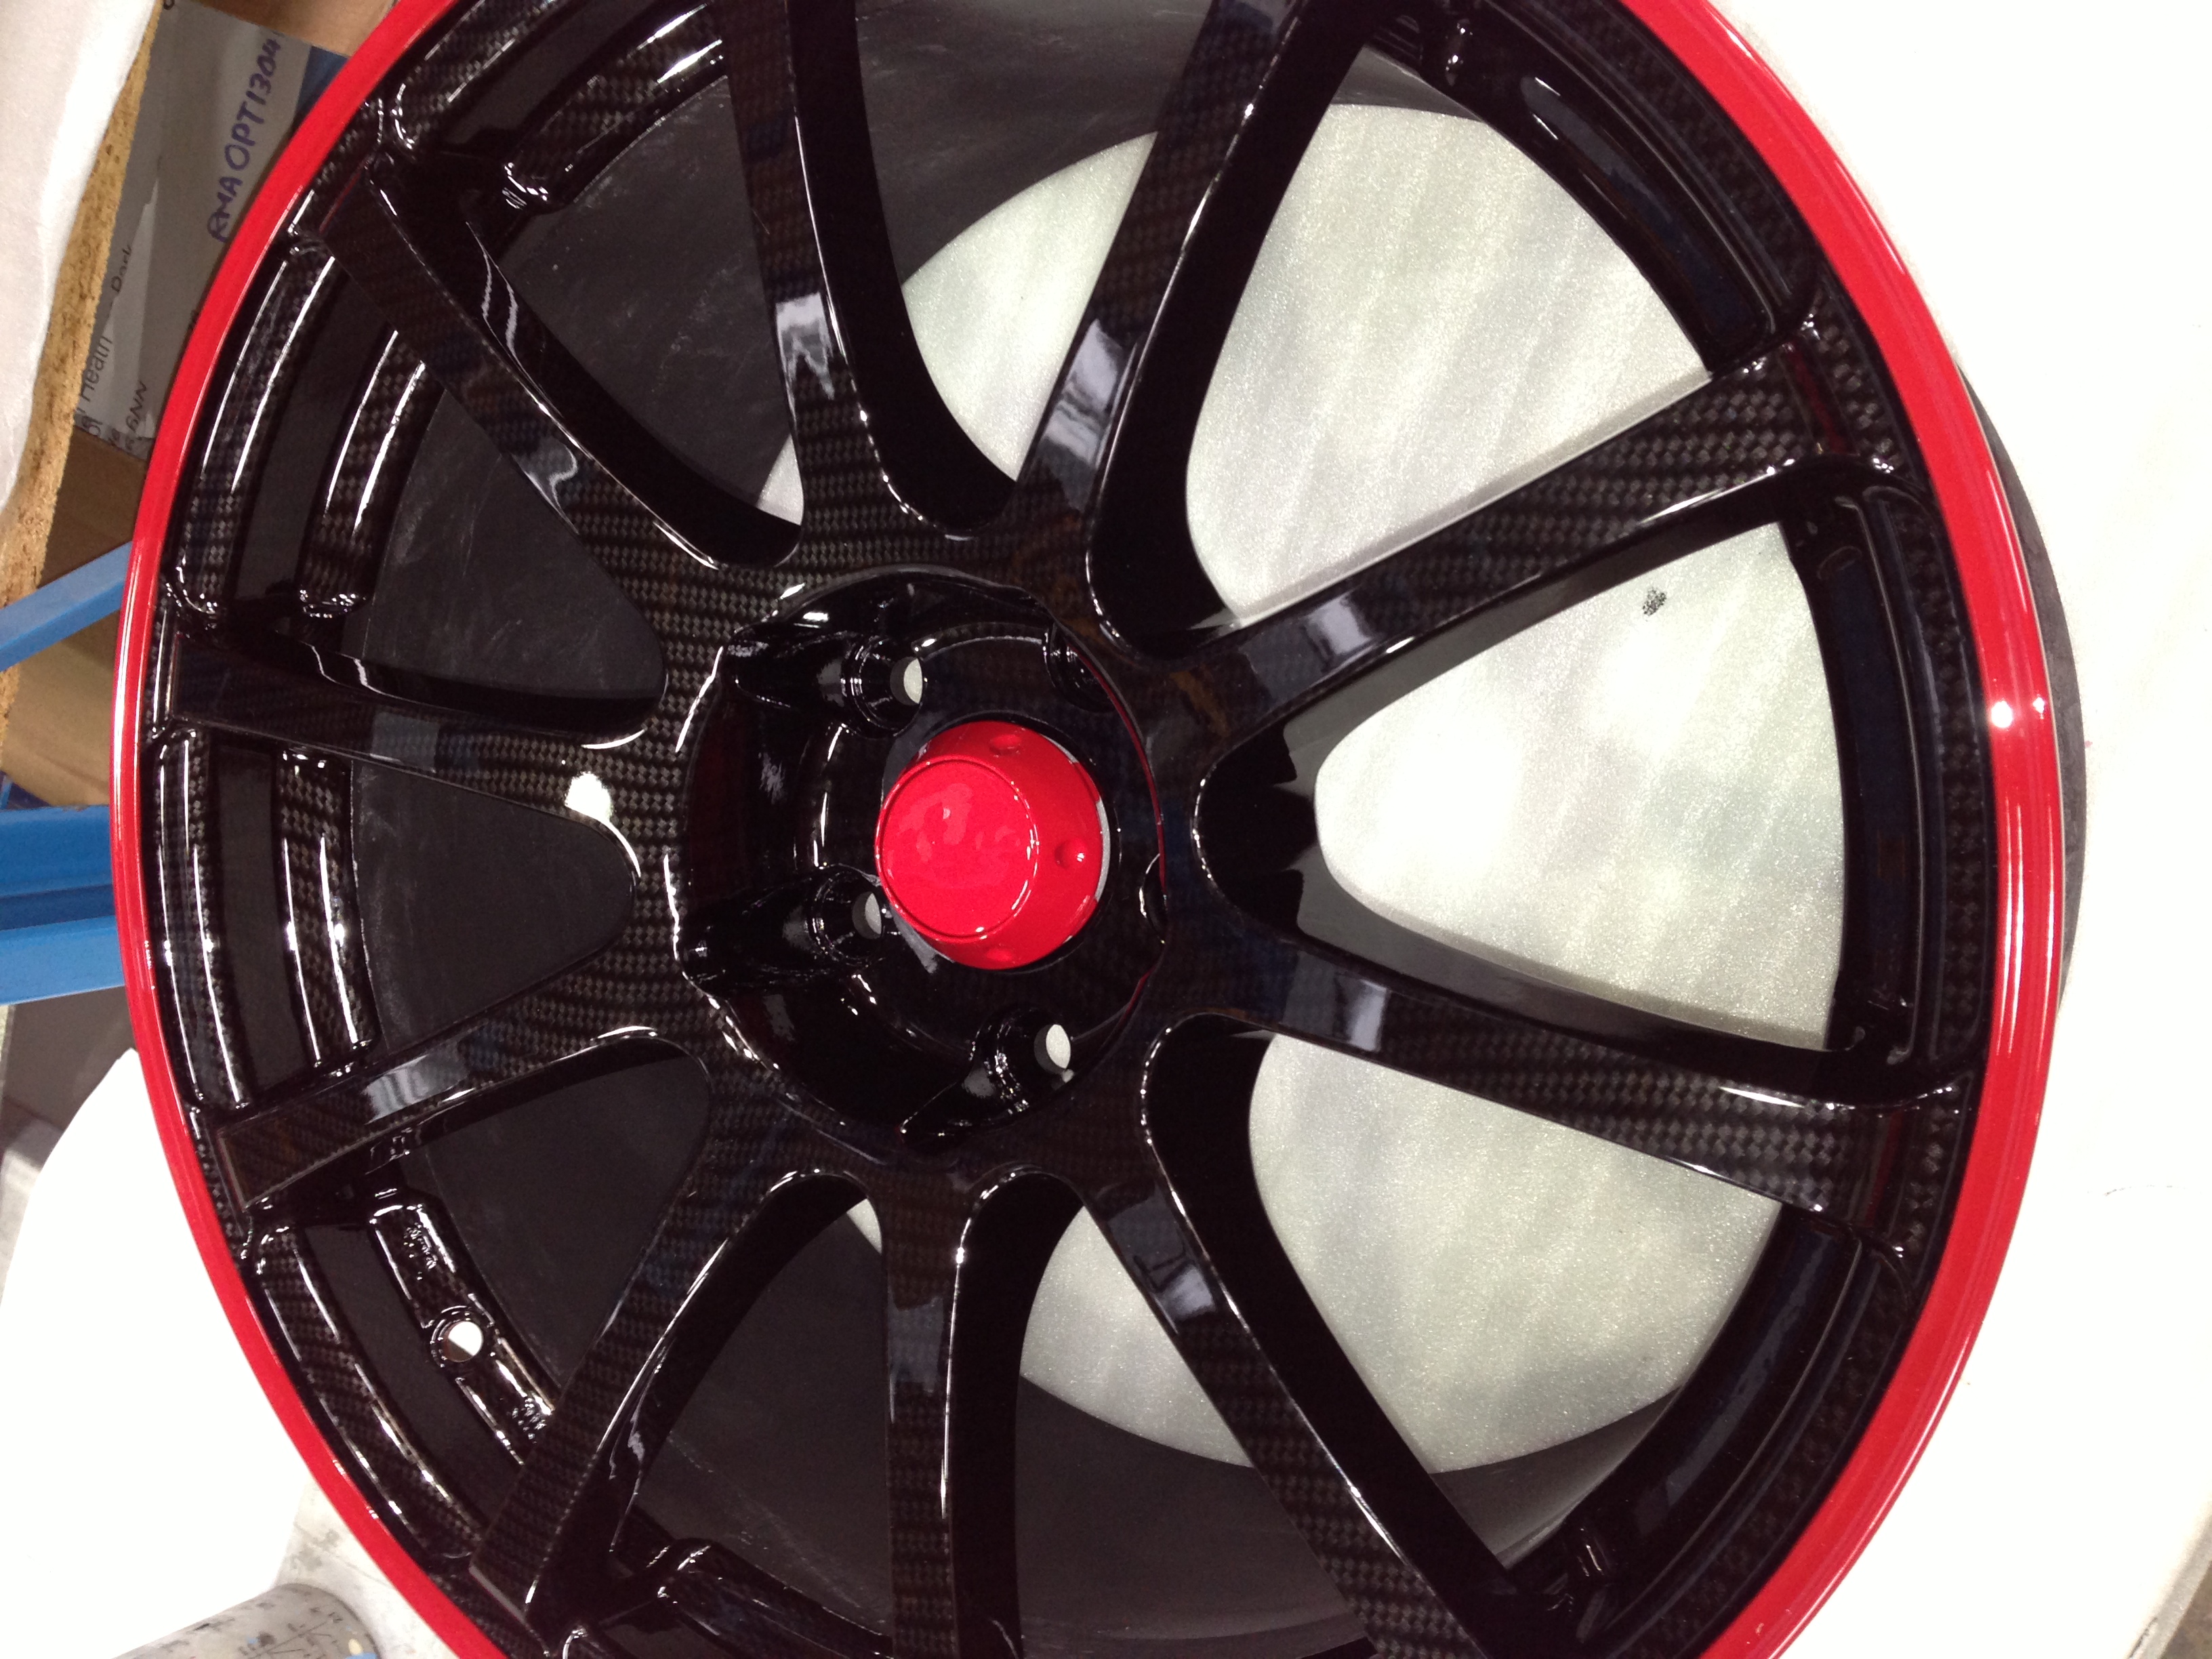 Car Alloy Wheels Coated In Carbon Fibre Painted Black And Red